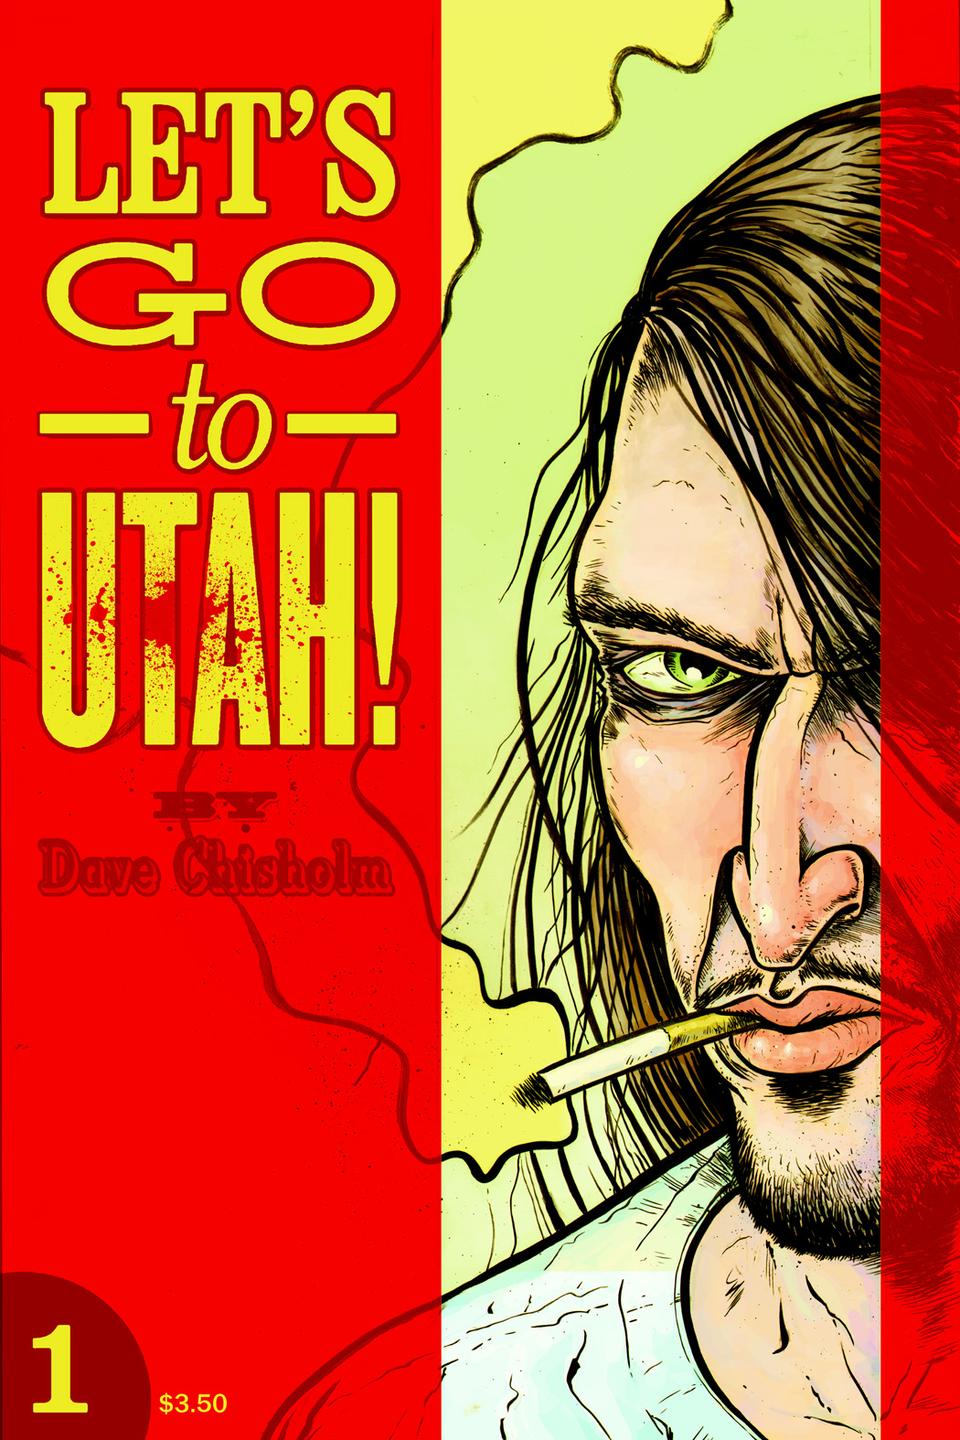 Let's go to Utah 01 COVER